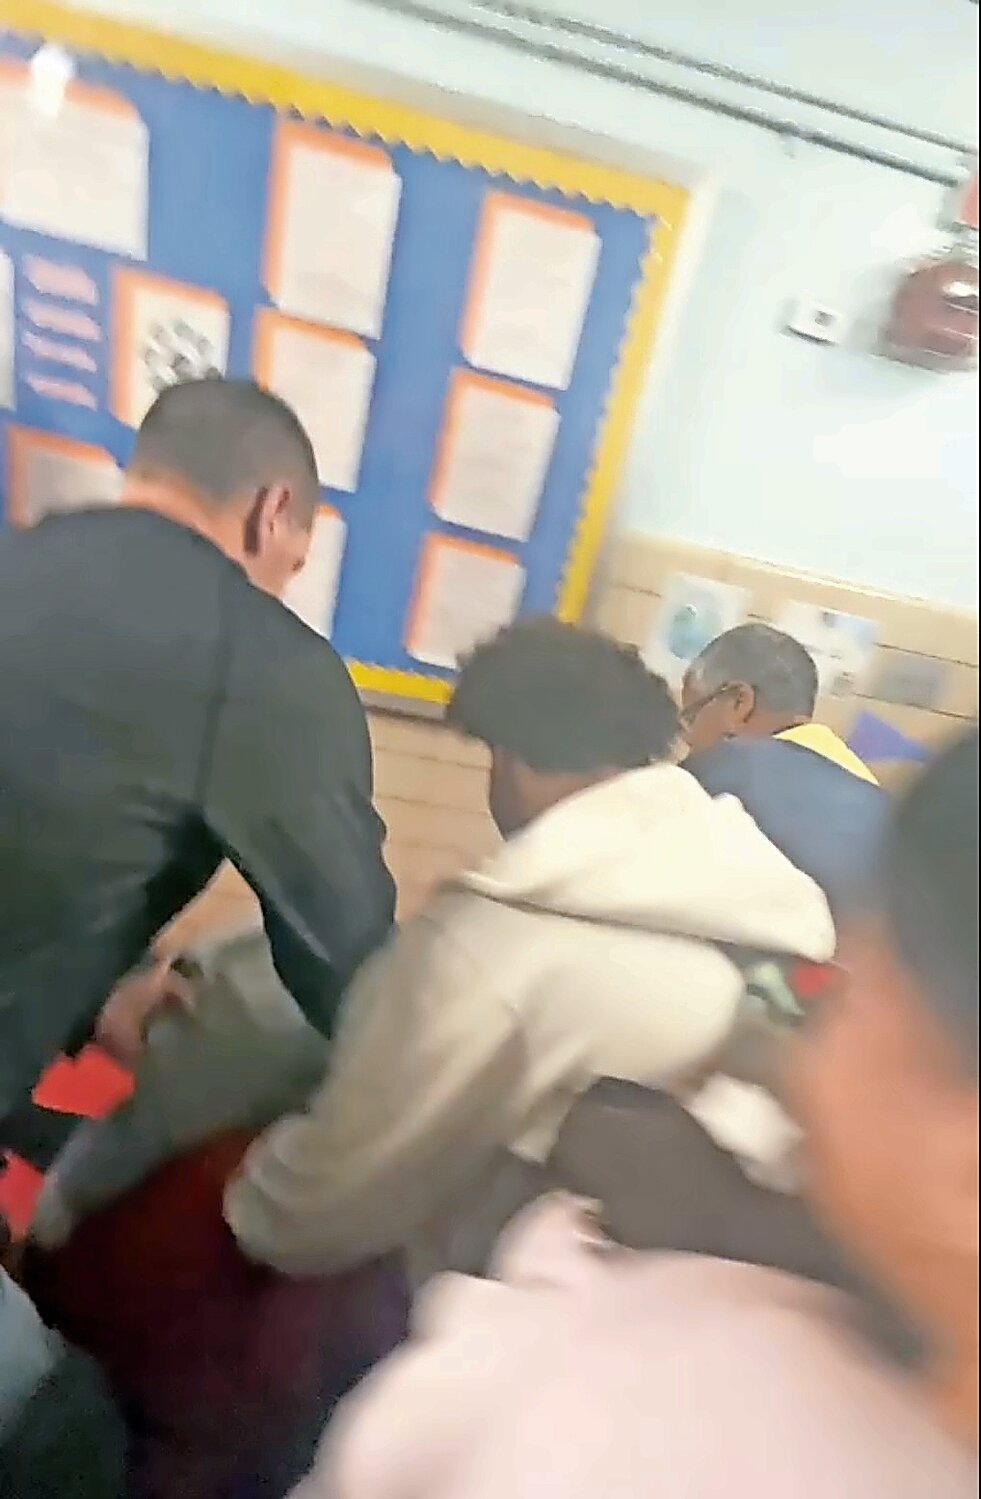 Two girls fight in the hallway at Riverdale / Kingsbridge Academy last school year. Video of the fight was taken by other students.